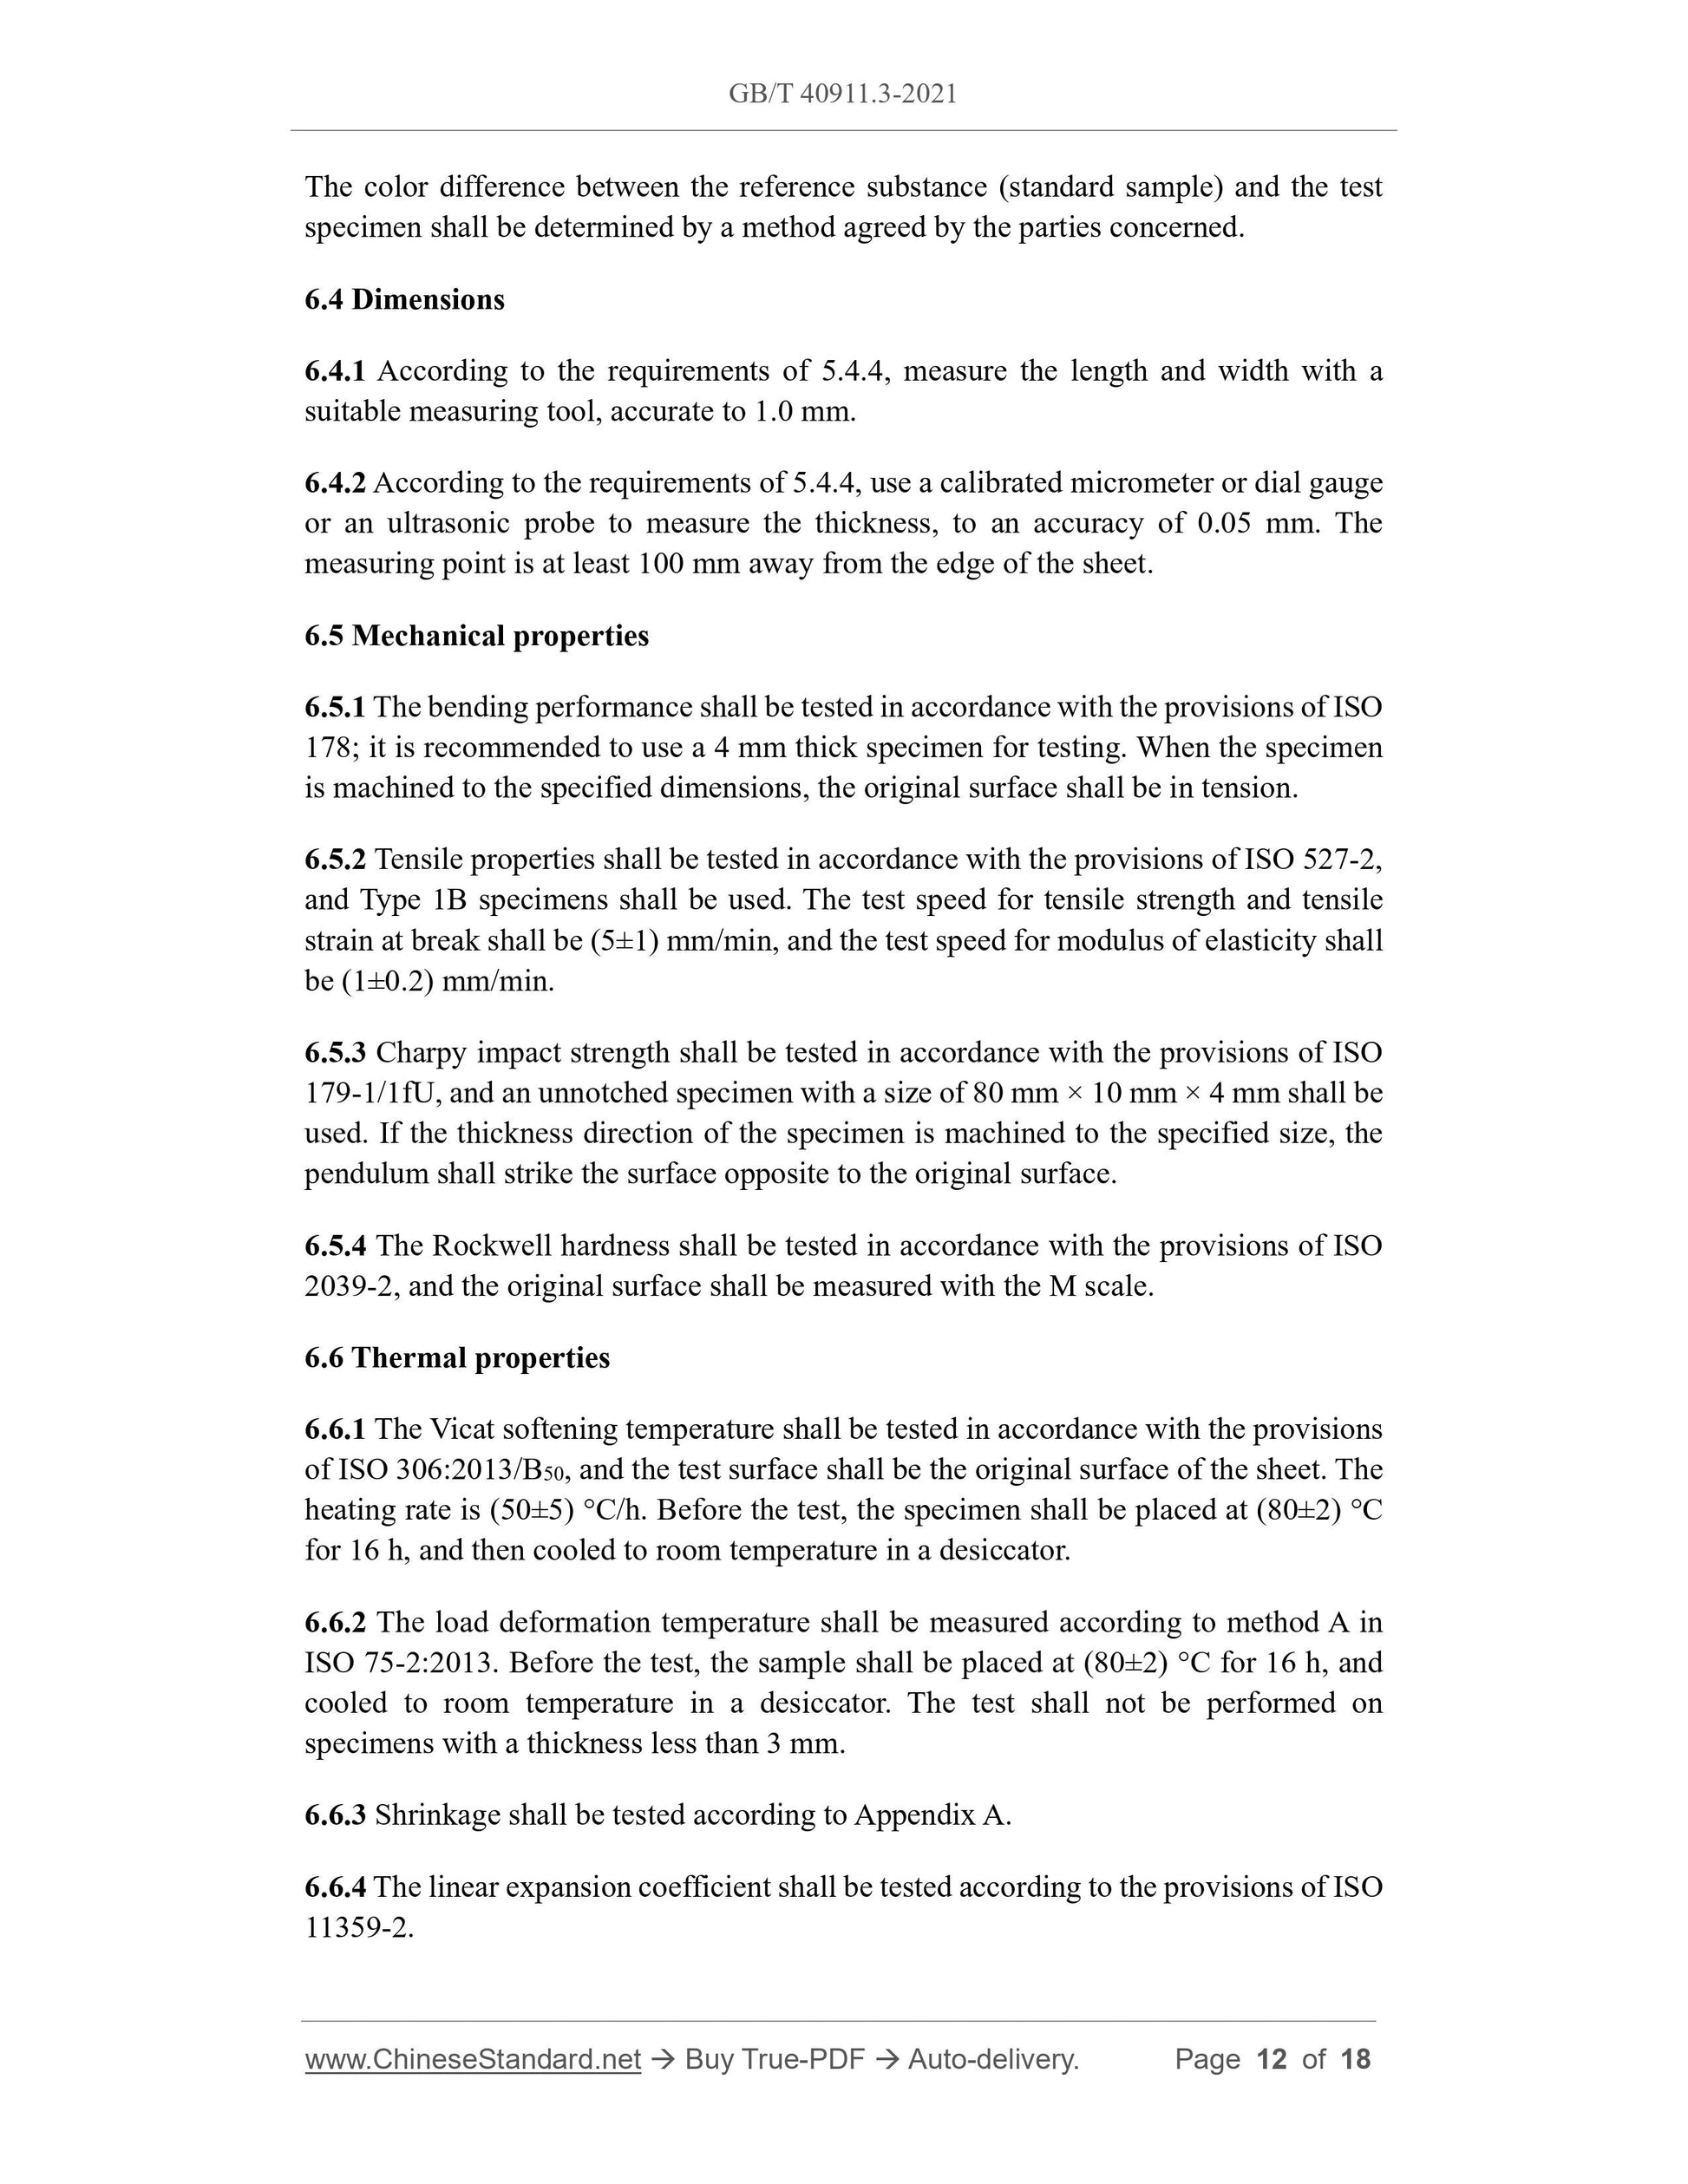 GB/T 40911.3-2021 Page 5